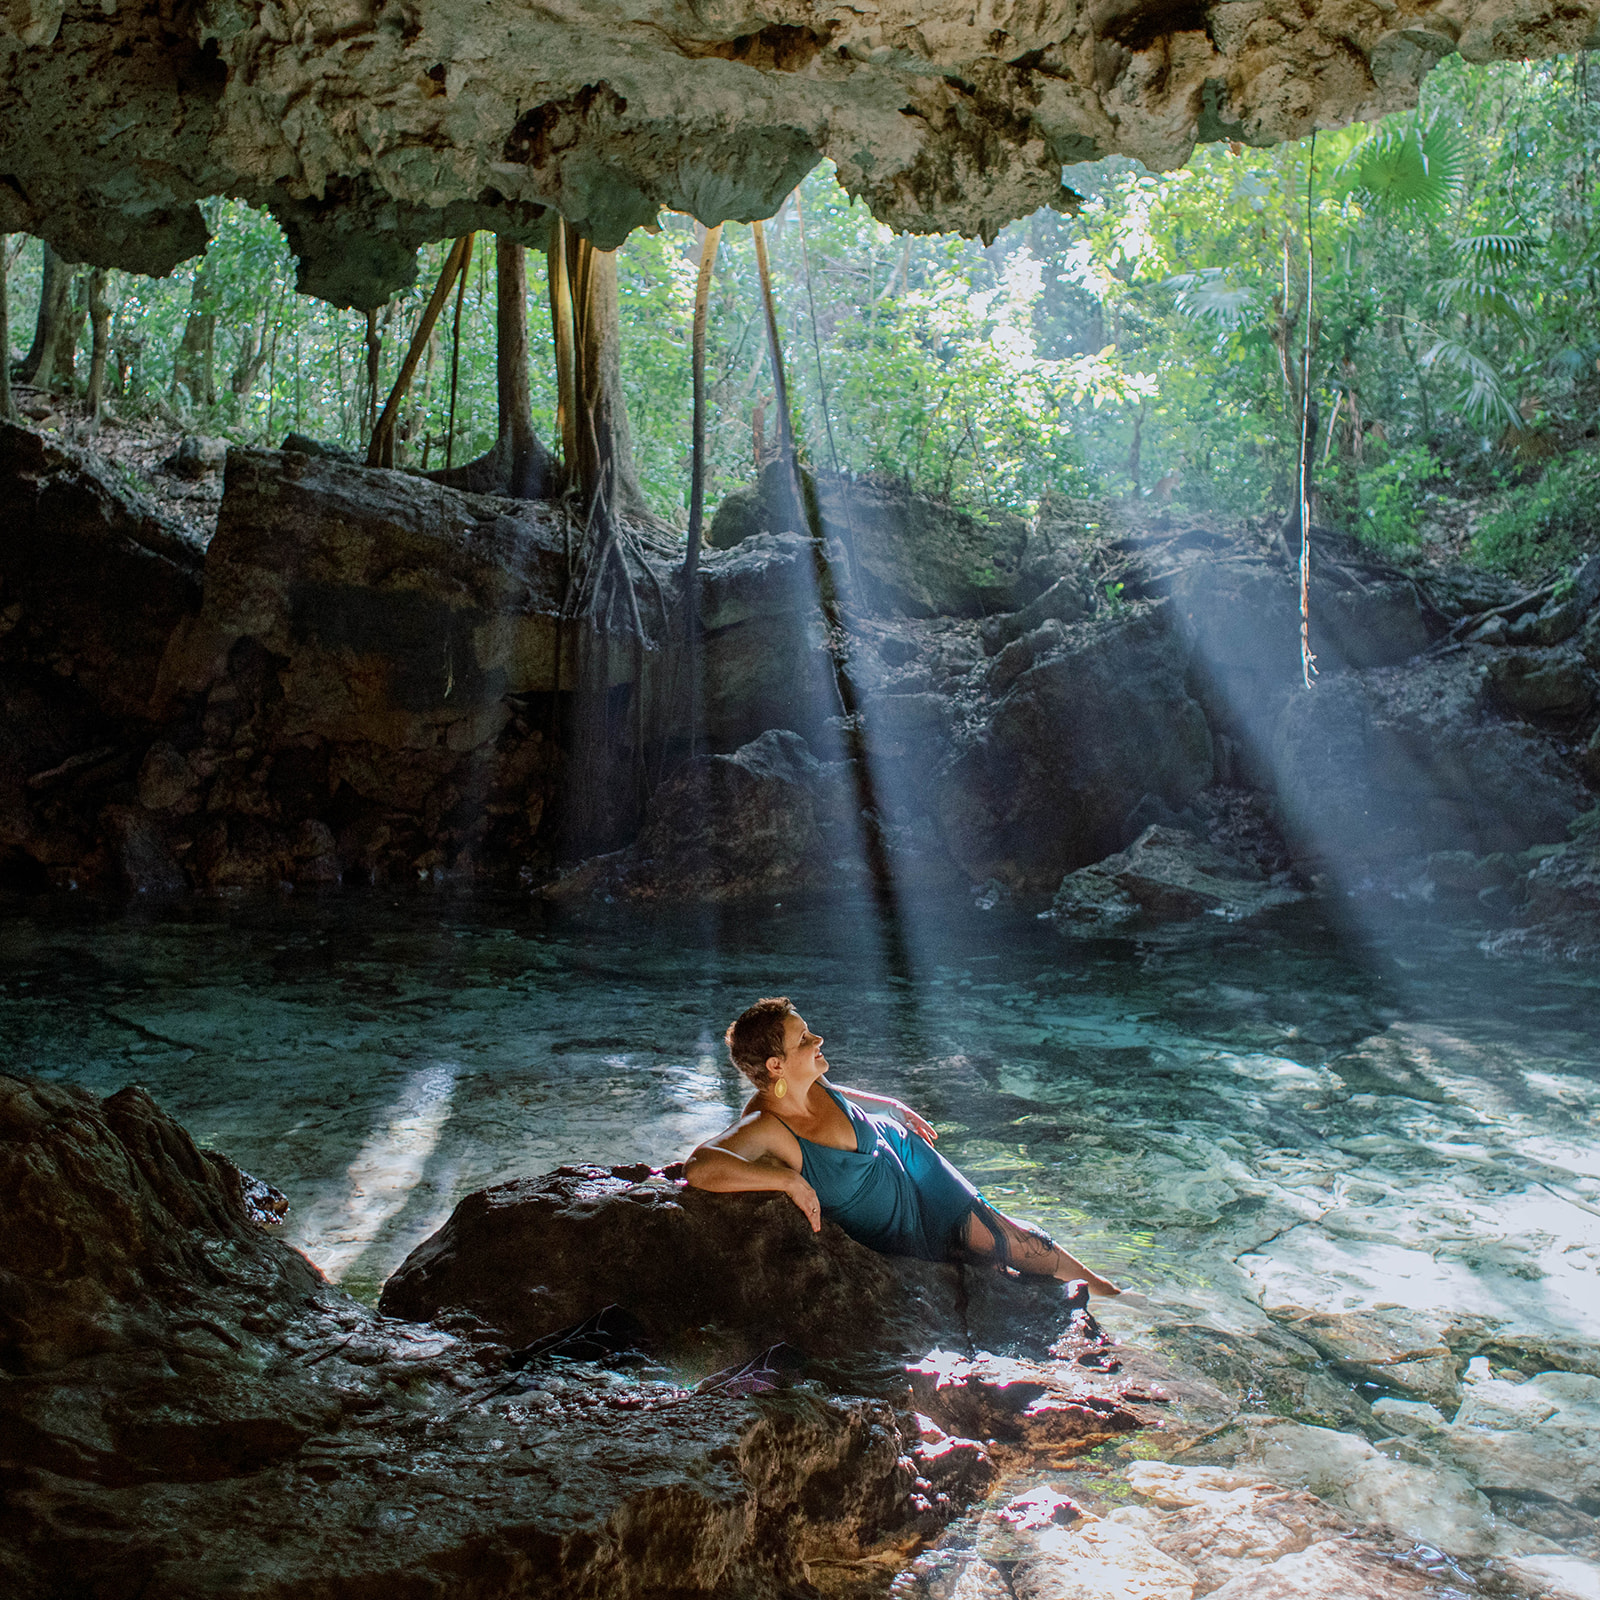 Branding photo shoot in Tulum, Mexico at the cenotes with Kristin Sweeting Photography